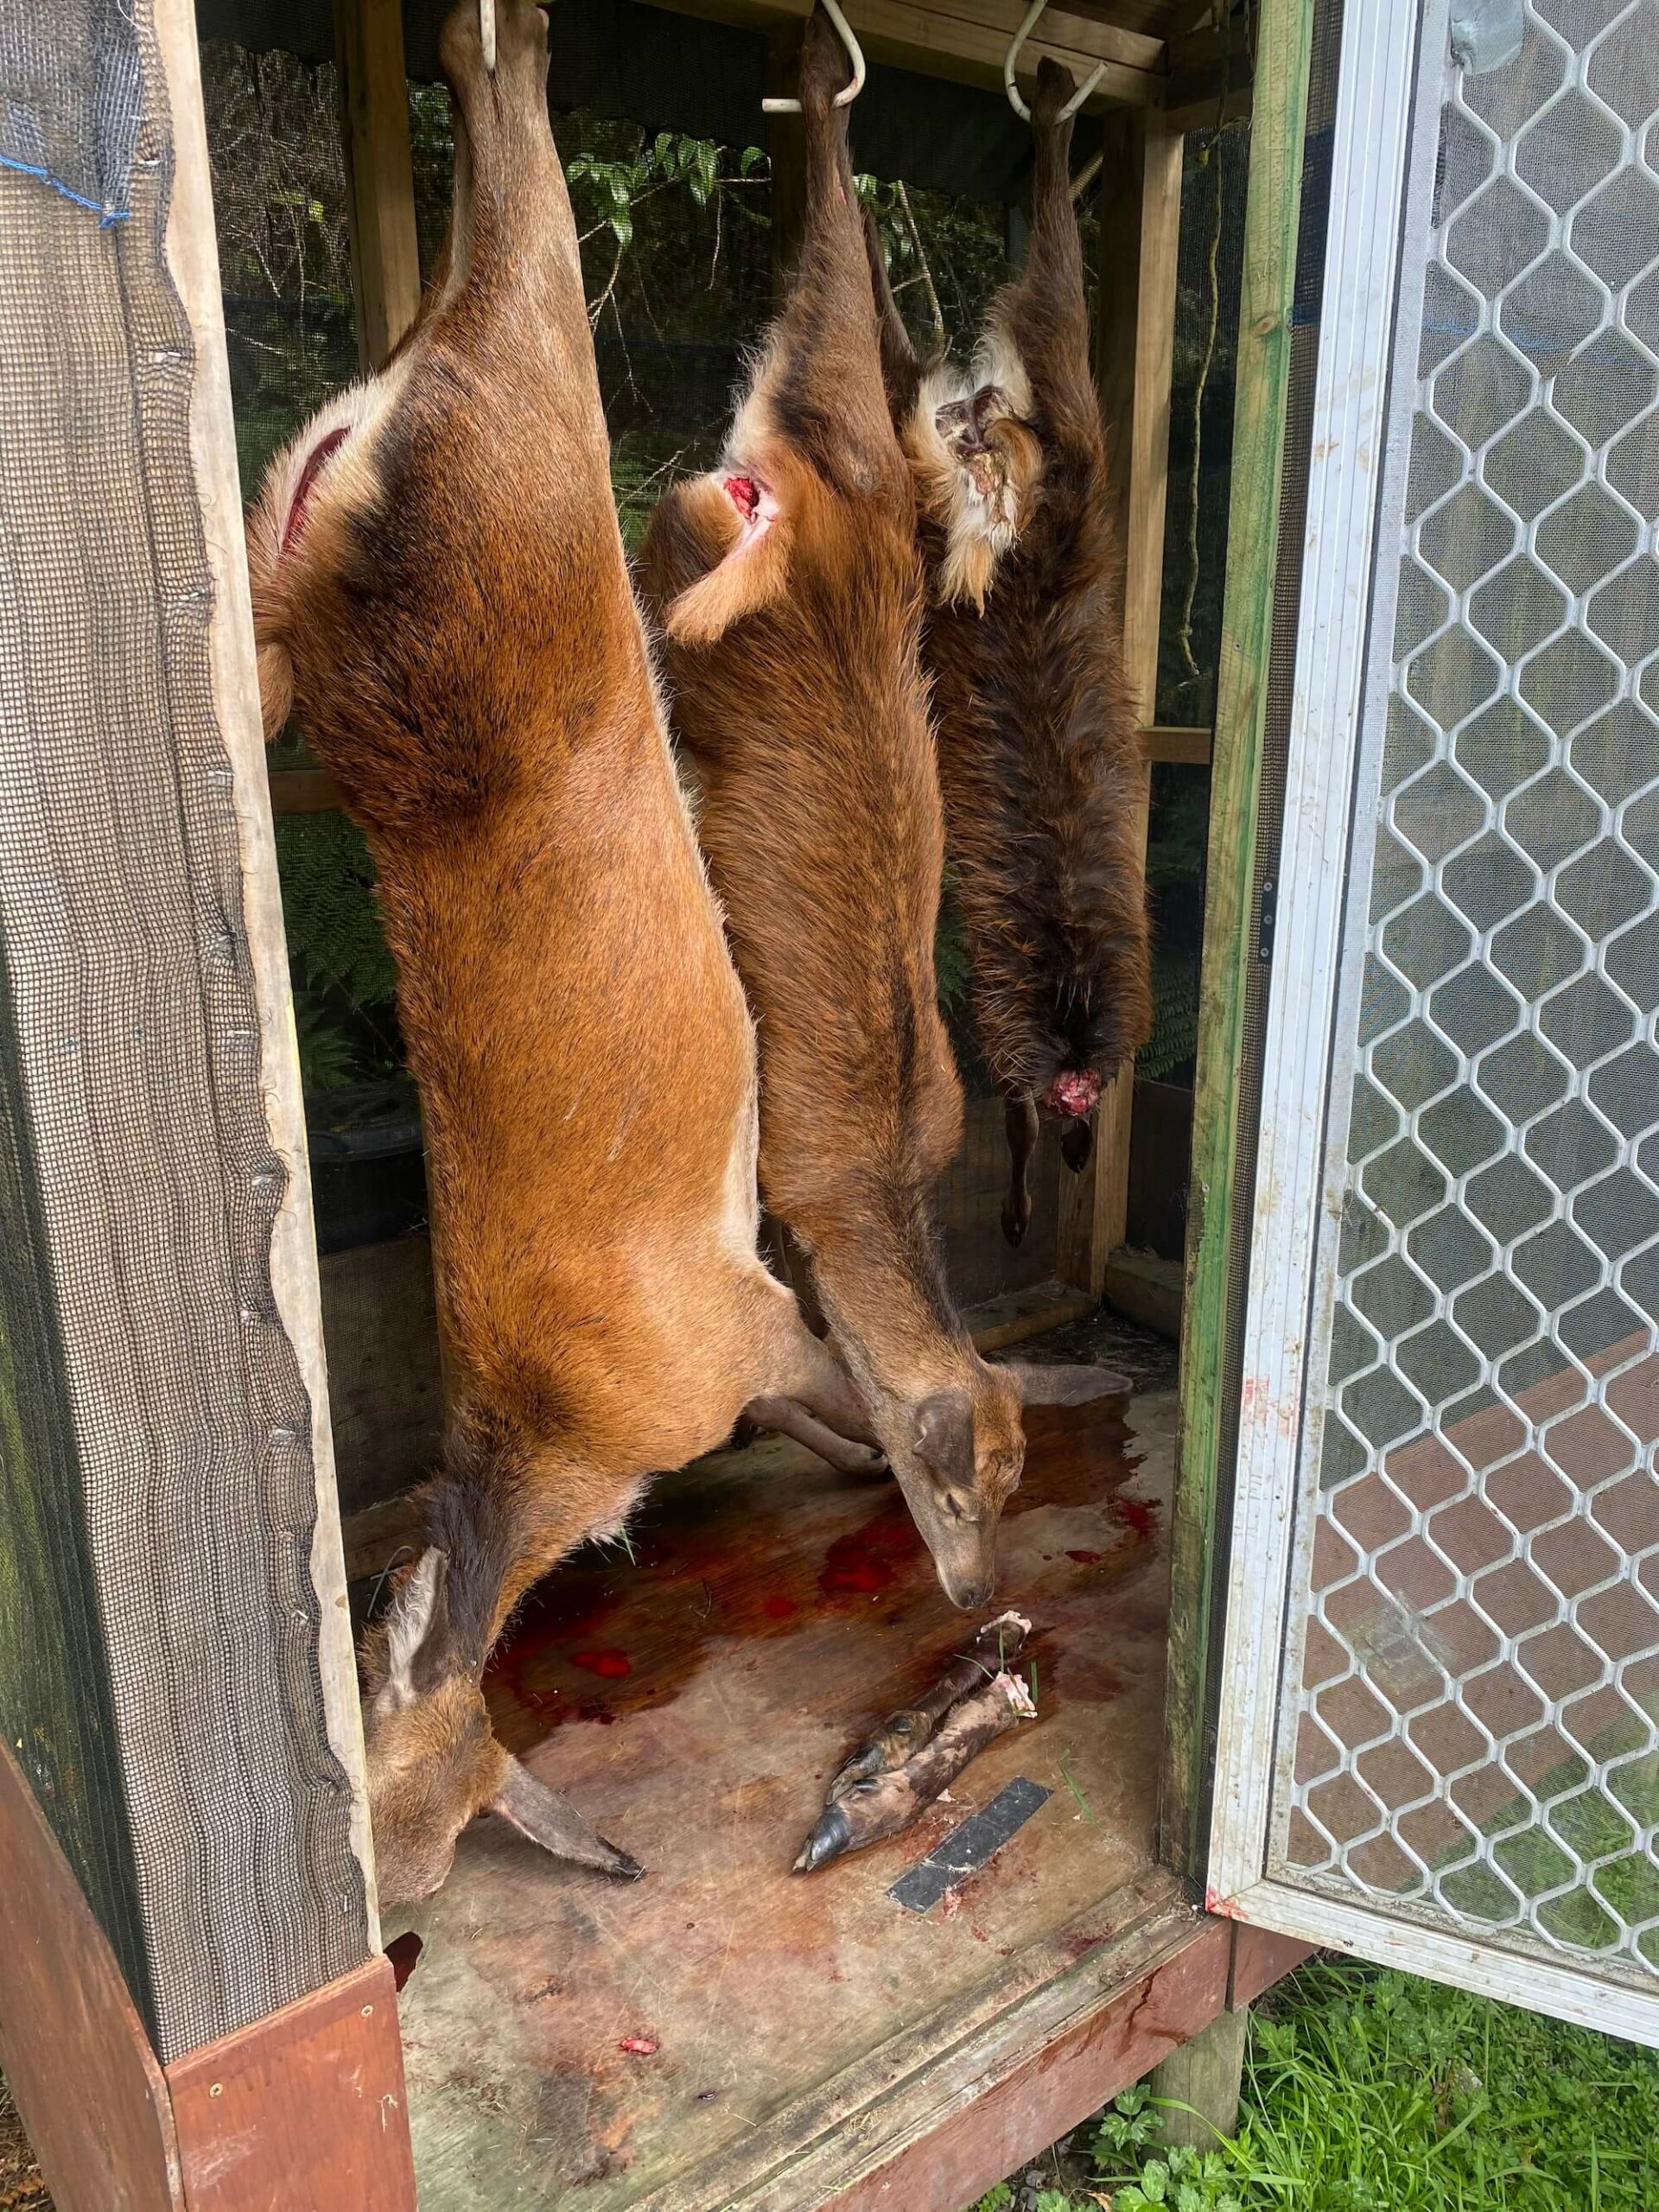 A group of deer hanging out in a shed.